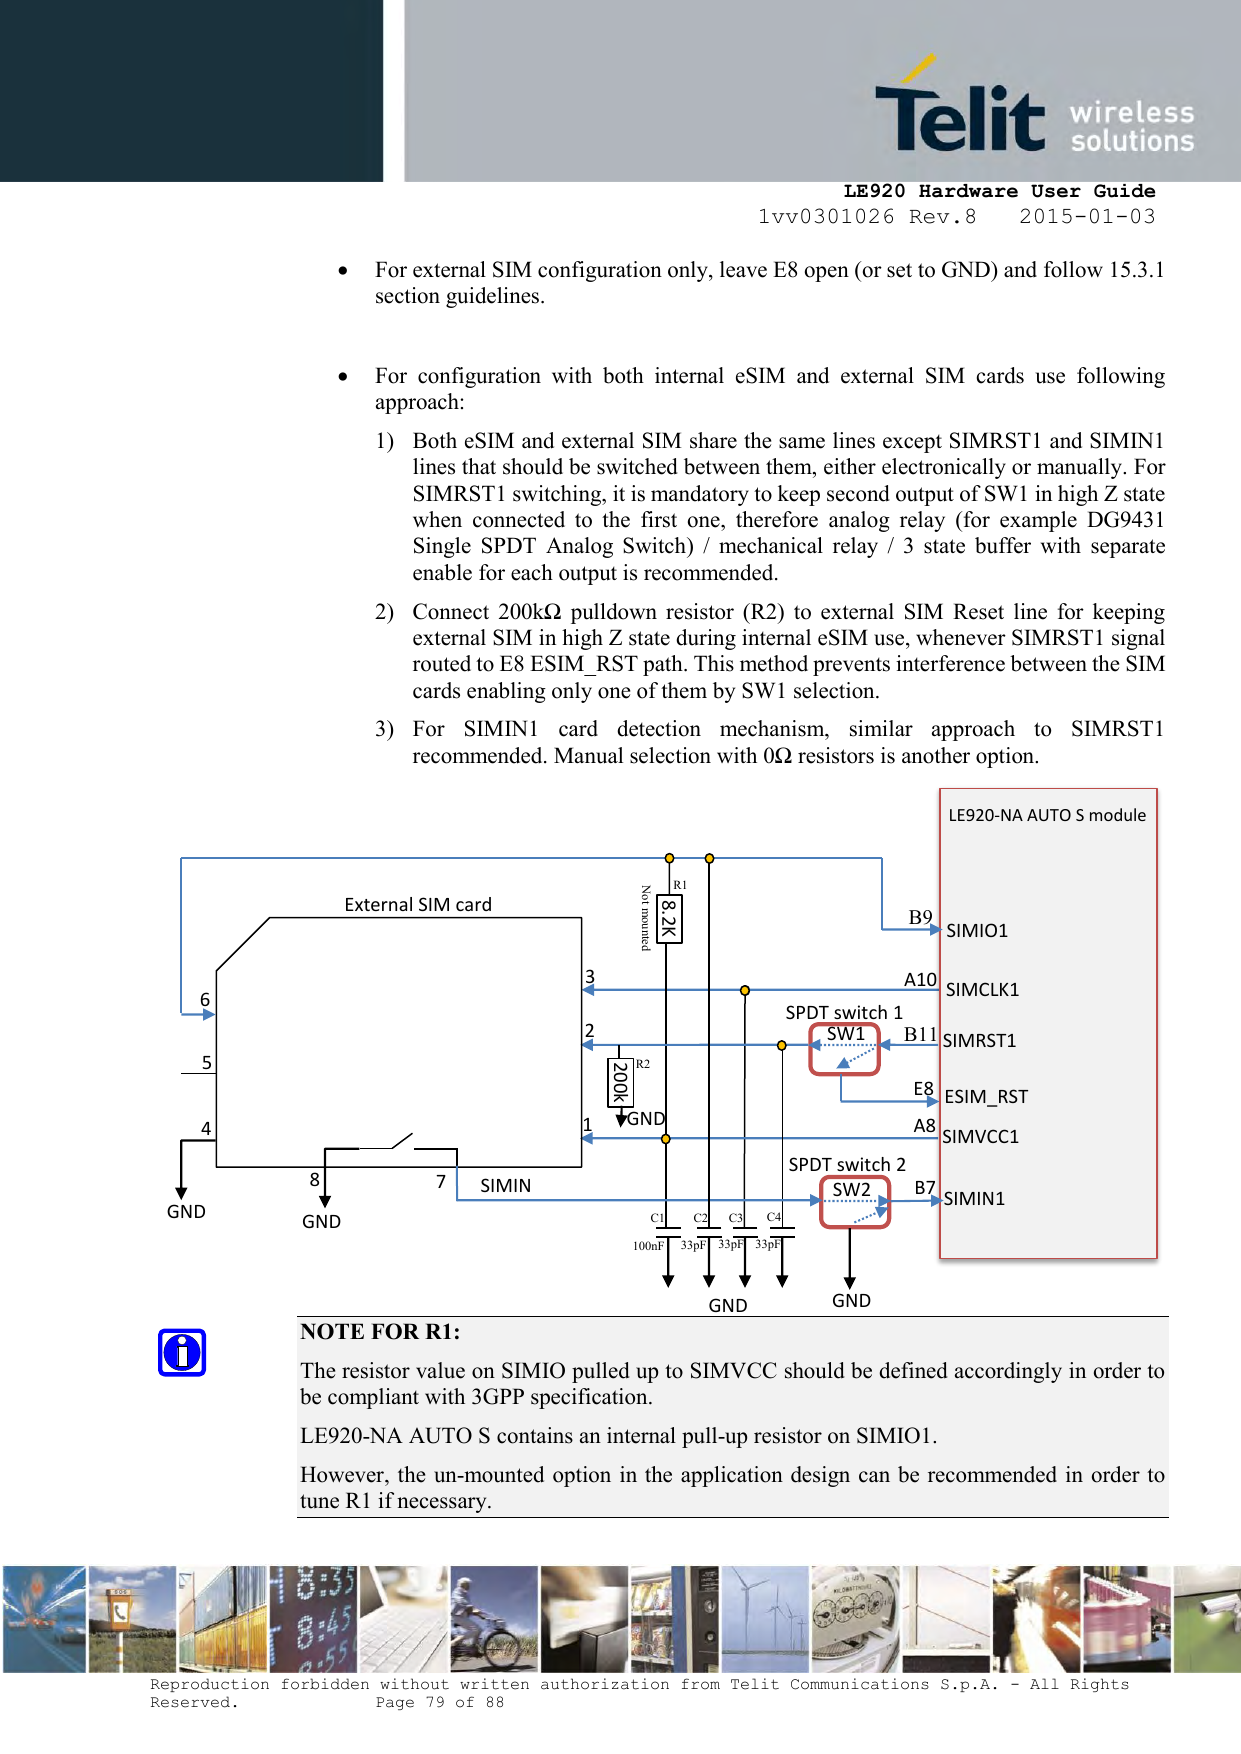     LE920 Hardware User Guide 1vv0301026 Rev.8   2015-01-03 Reproduction forbidden without written authorization from Telit Communications S.p.A. - All Rights Reserved.    Page 79 of 88   For external SIM configuration only, leave E8 open (or set to GND) and follow 15.3.1 section guidelines.   For  configuration  with  both  internal  eSIM  and  external  SIM  cards  use  following approach:  1) Both eSIM and external SIM share the same lines except SIMRST1 and SIMIN1 lines that should be switched between them, either electronically or manually. For SIMRST1 switching, it is mandatory to keep second output of SW1 in high Z state when  connected  to  the  first  one,  therefore  analog  relay  (for  example  DG9431 Single  SPDT  Analog  Switch)  /  mechanical  relay  /  3  state  buffer  with  separate enable for each output is recommended. 2) Connect  200kΩ  pulldown  resistor  (R2)  to  external  SIM  Reset  line  for  keeping external SIM in high Z state during internal eSIM use, whenever SIMRST1 signal routed to E8 ESIM_RST path. This method prevents interference between the SIM cards enabling only one of them by SW1 selection. 3) For  SIMIN1  card  detection  mechanism,  similar  approach  to  SIMRST1 recommended. Manual selection with 0Ω resistors is another option.               NOTE FOR R1: The resistor value on SIMIO pulled up to SIMVCC should be defined accordingly in order to be compliant with 3GPP specification. LE920-NA AUTO S contains an internal pull-up resistor on SIMIO1. However, the un-mounted option in the application design can be recommended in order to tune R1 if necessary.   C1 R2 Not mounted  R1 B11 A10 SIMCLK1 SIMRST1 SIMVCC1 LE920-NA AUTO S module  SIMIN1 8 7 SIMIN 1 2 3 4 5 ESIM_RST A8 E8 SIMIO1 6 External SIM card SPDT switch 1 SPDT switch 2 SW1 SW2 8.2K GND GND GND GND 200k GND B9 B7 C2 C3 C4 100nF 33pF 33pF 33pF 